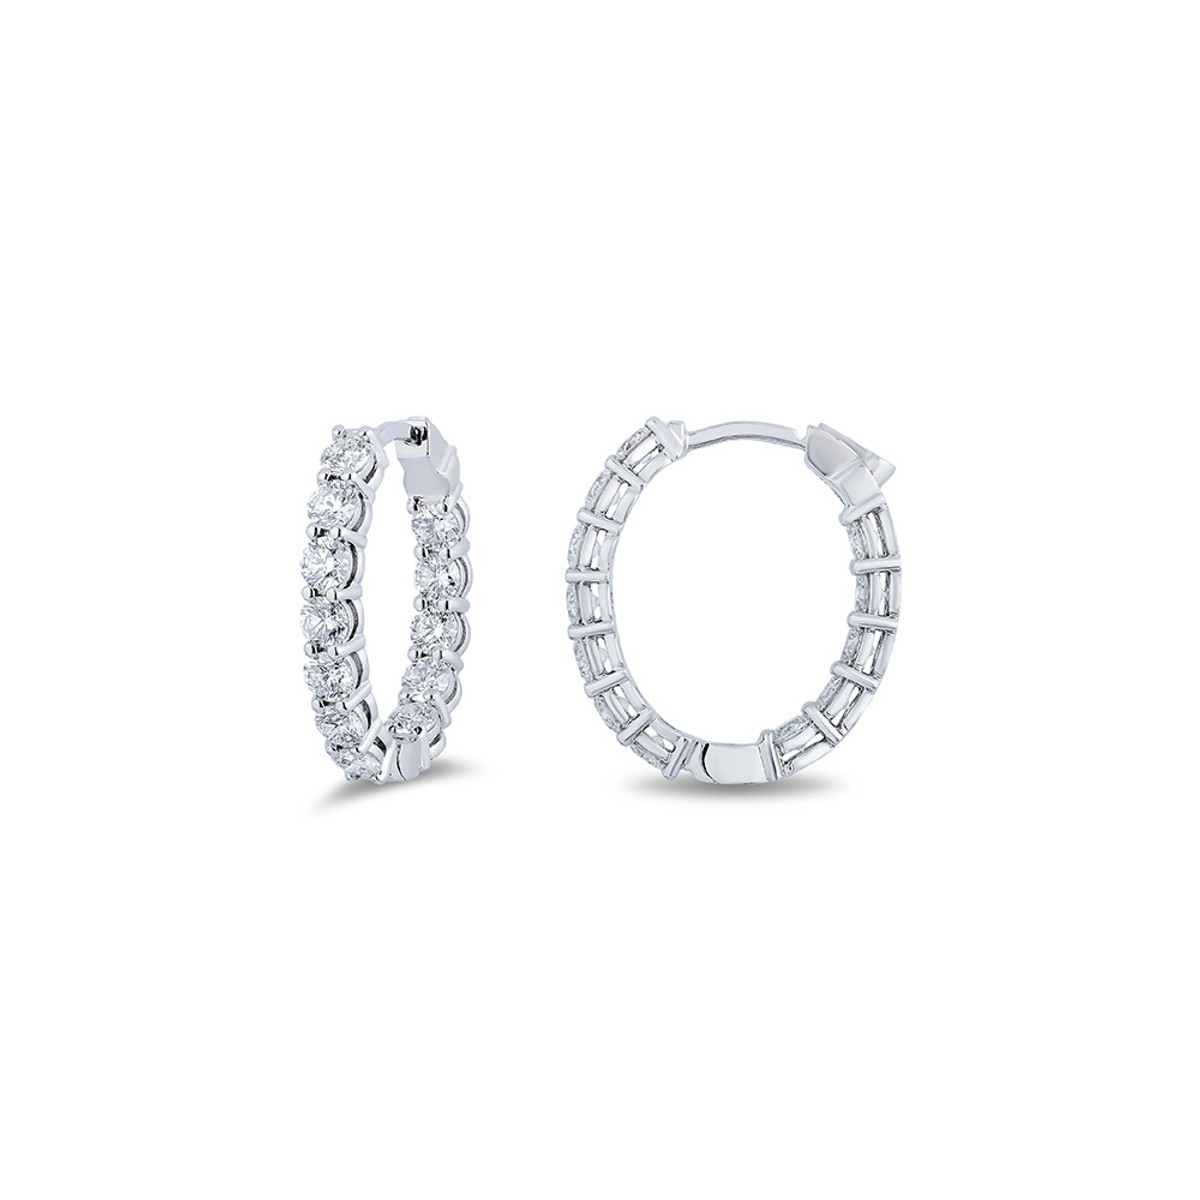 Hyde Park Collection 18K White Gold Hoop Diamond Earrings-36678 Product Image